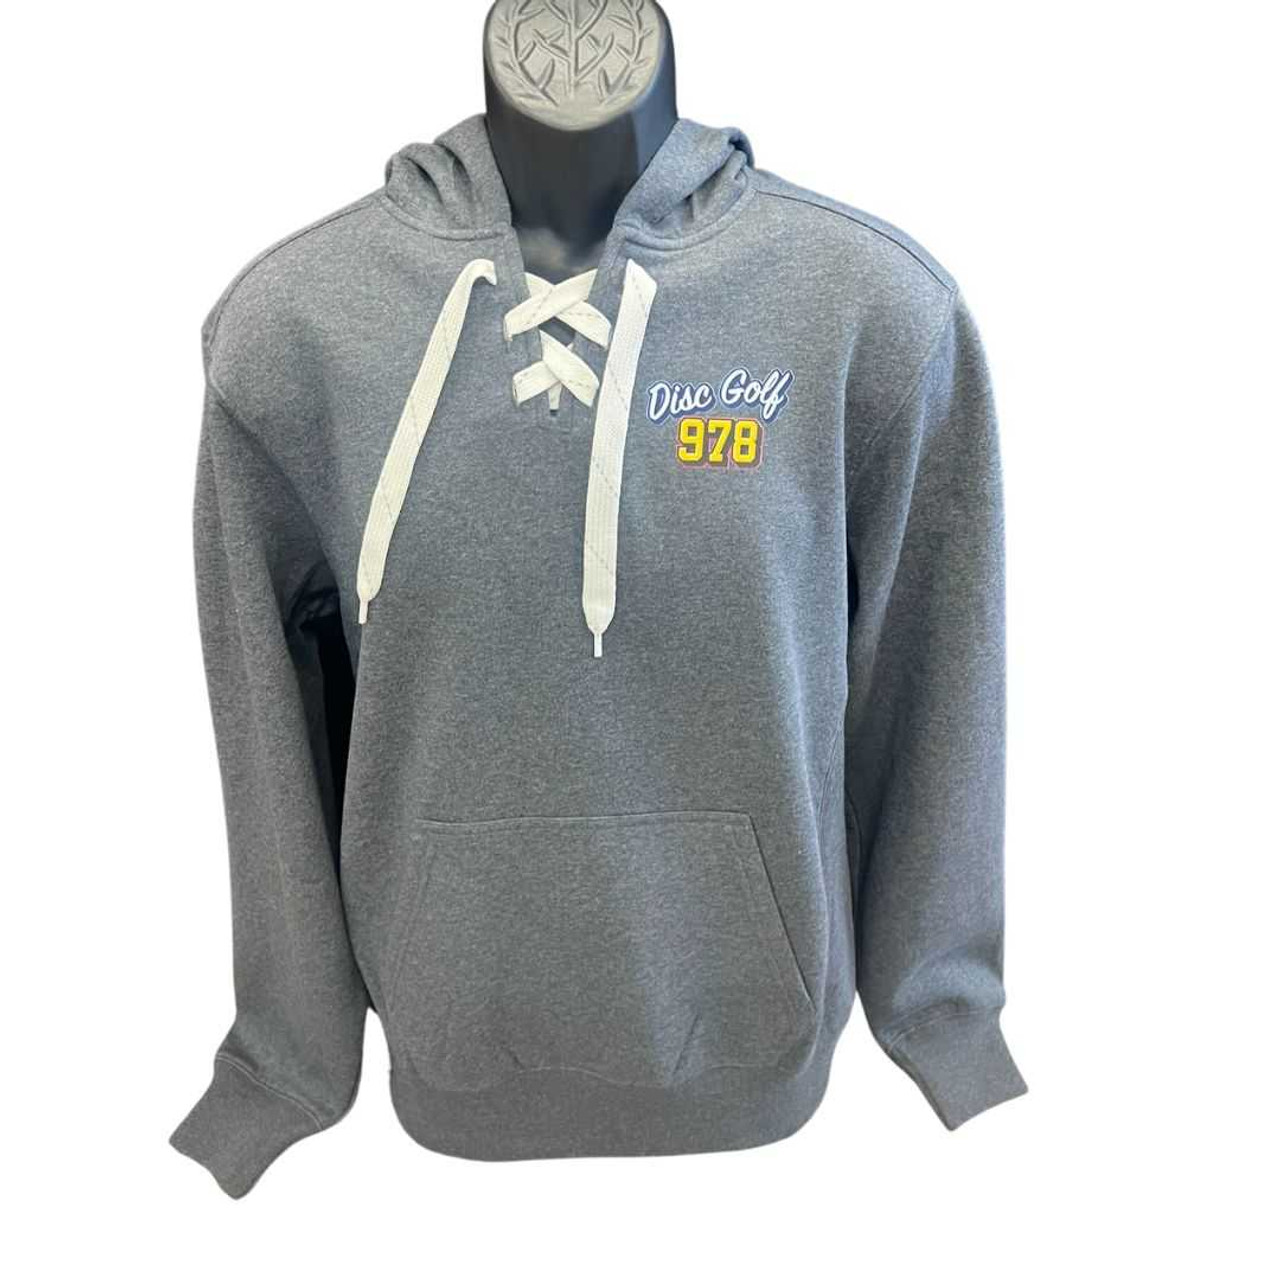 Disc Golf 978 Lace Up Pullover Hooded Sweat Shirt - Dark Gray